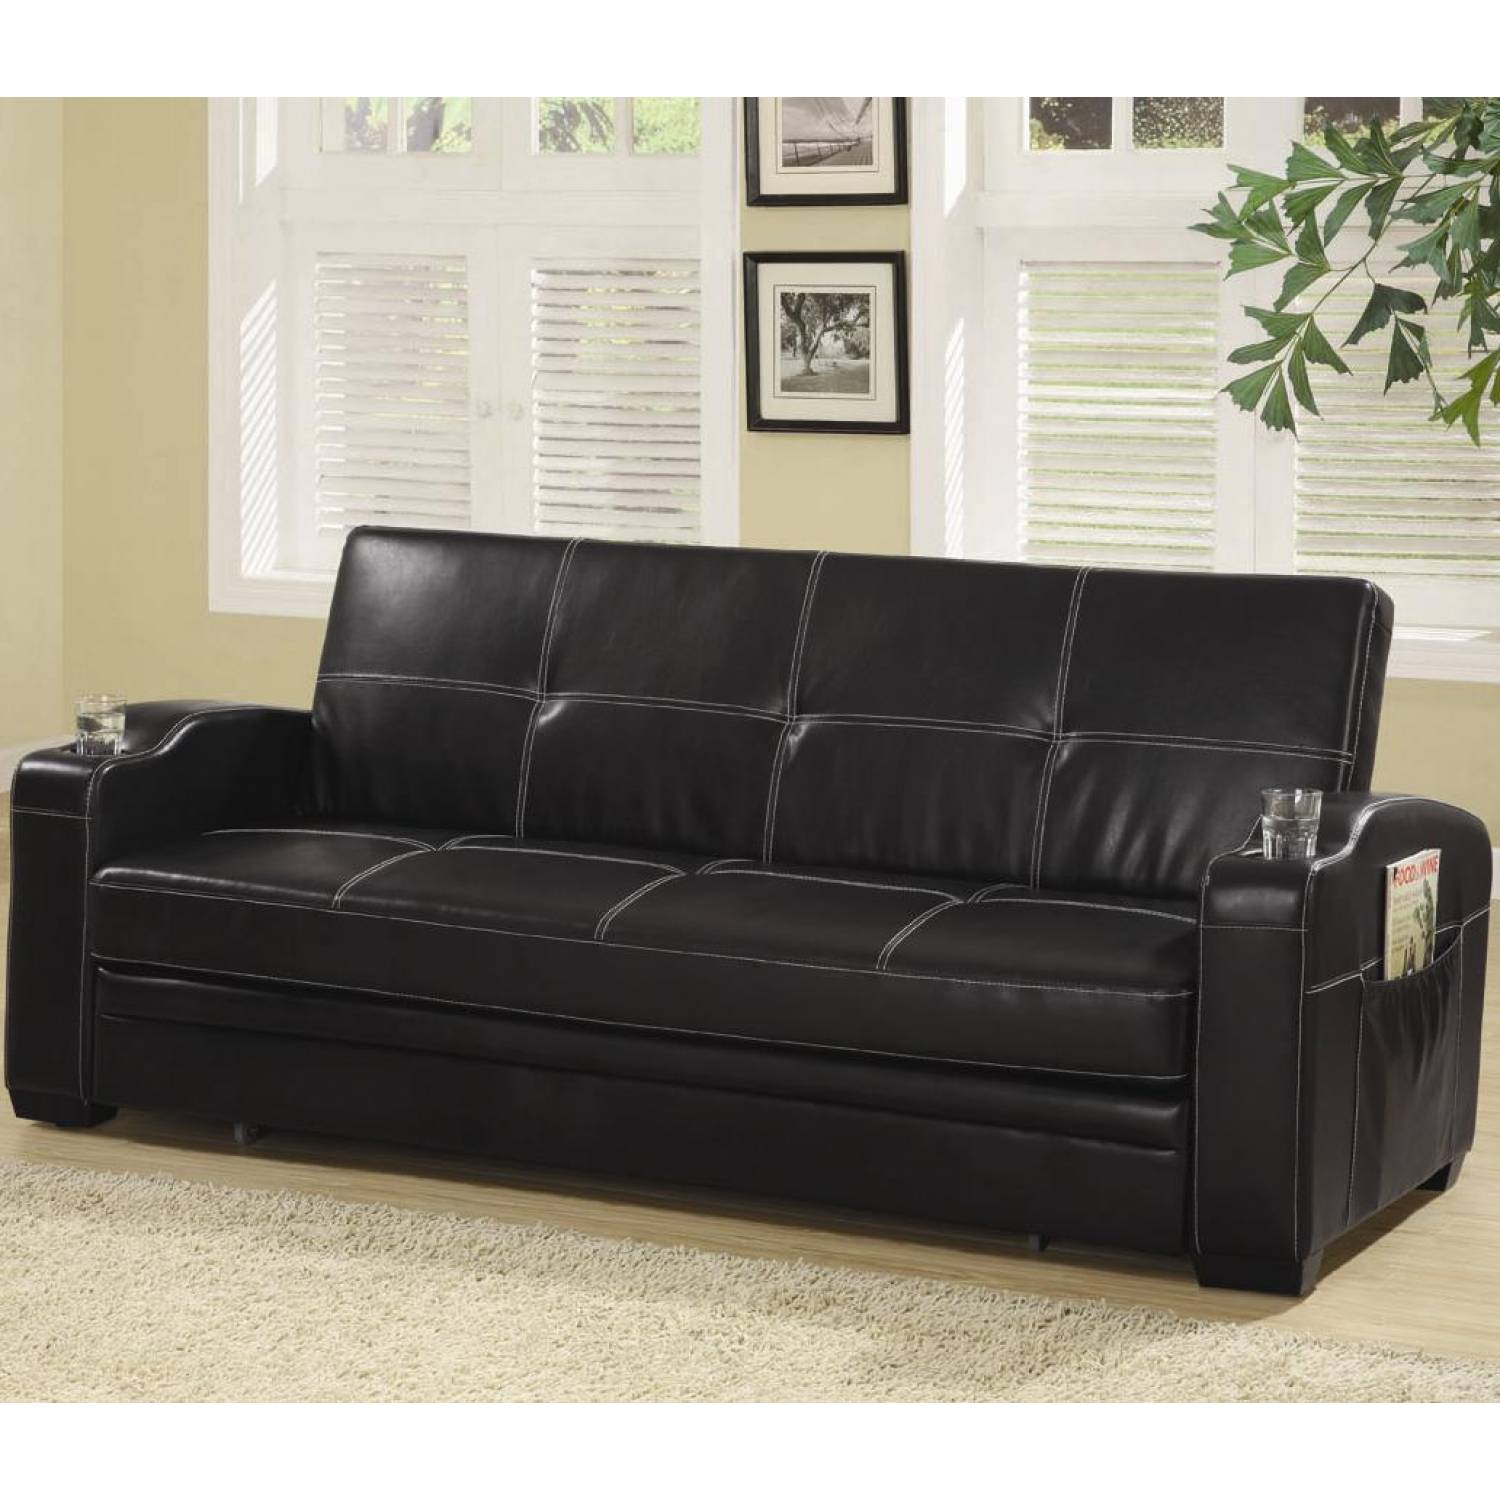 Sofa Beds And Futons Faux Leather, Leather Futon With Storage